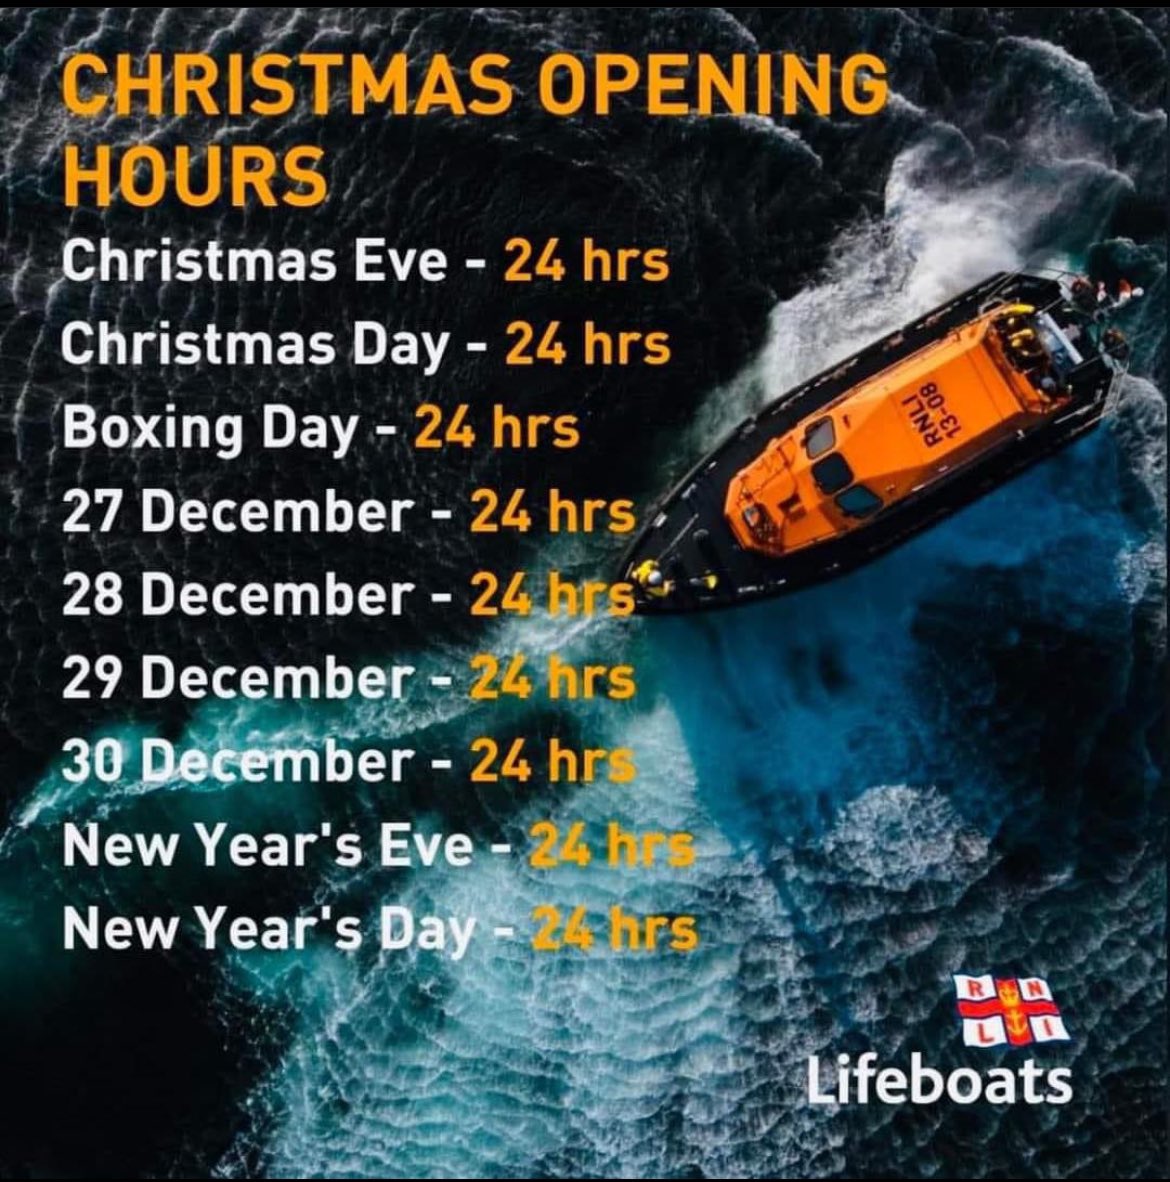 Just in case anyone is wondering what our opening hours are over the Christmas holidays #OneCrew #ProudOfOurCrowd #AlwaysOnCall